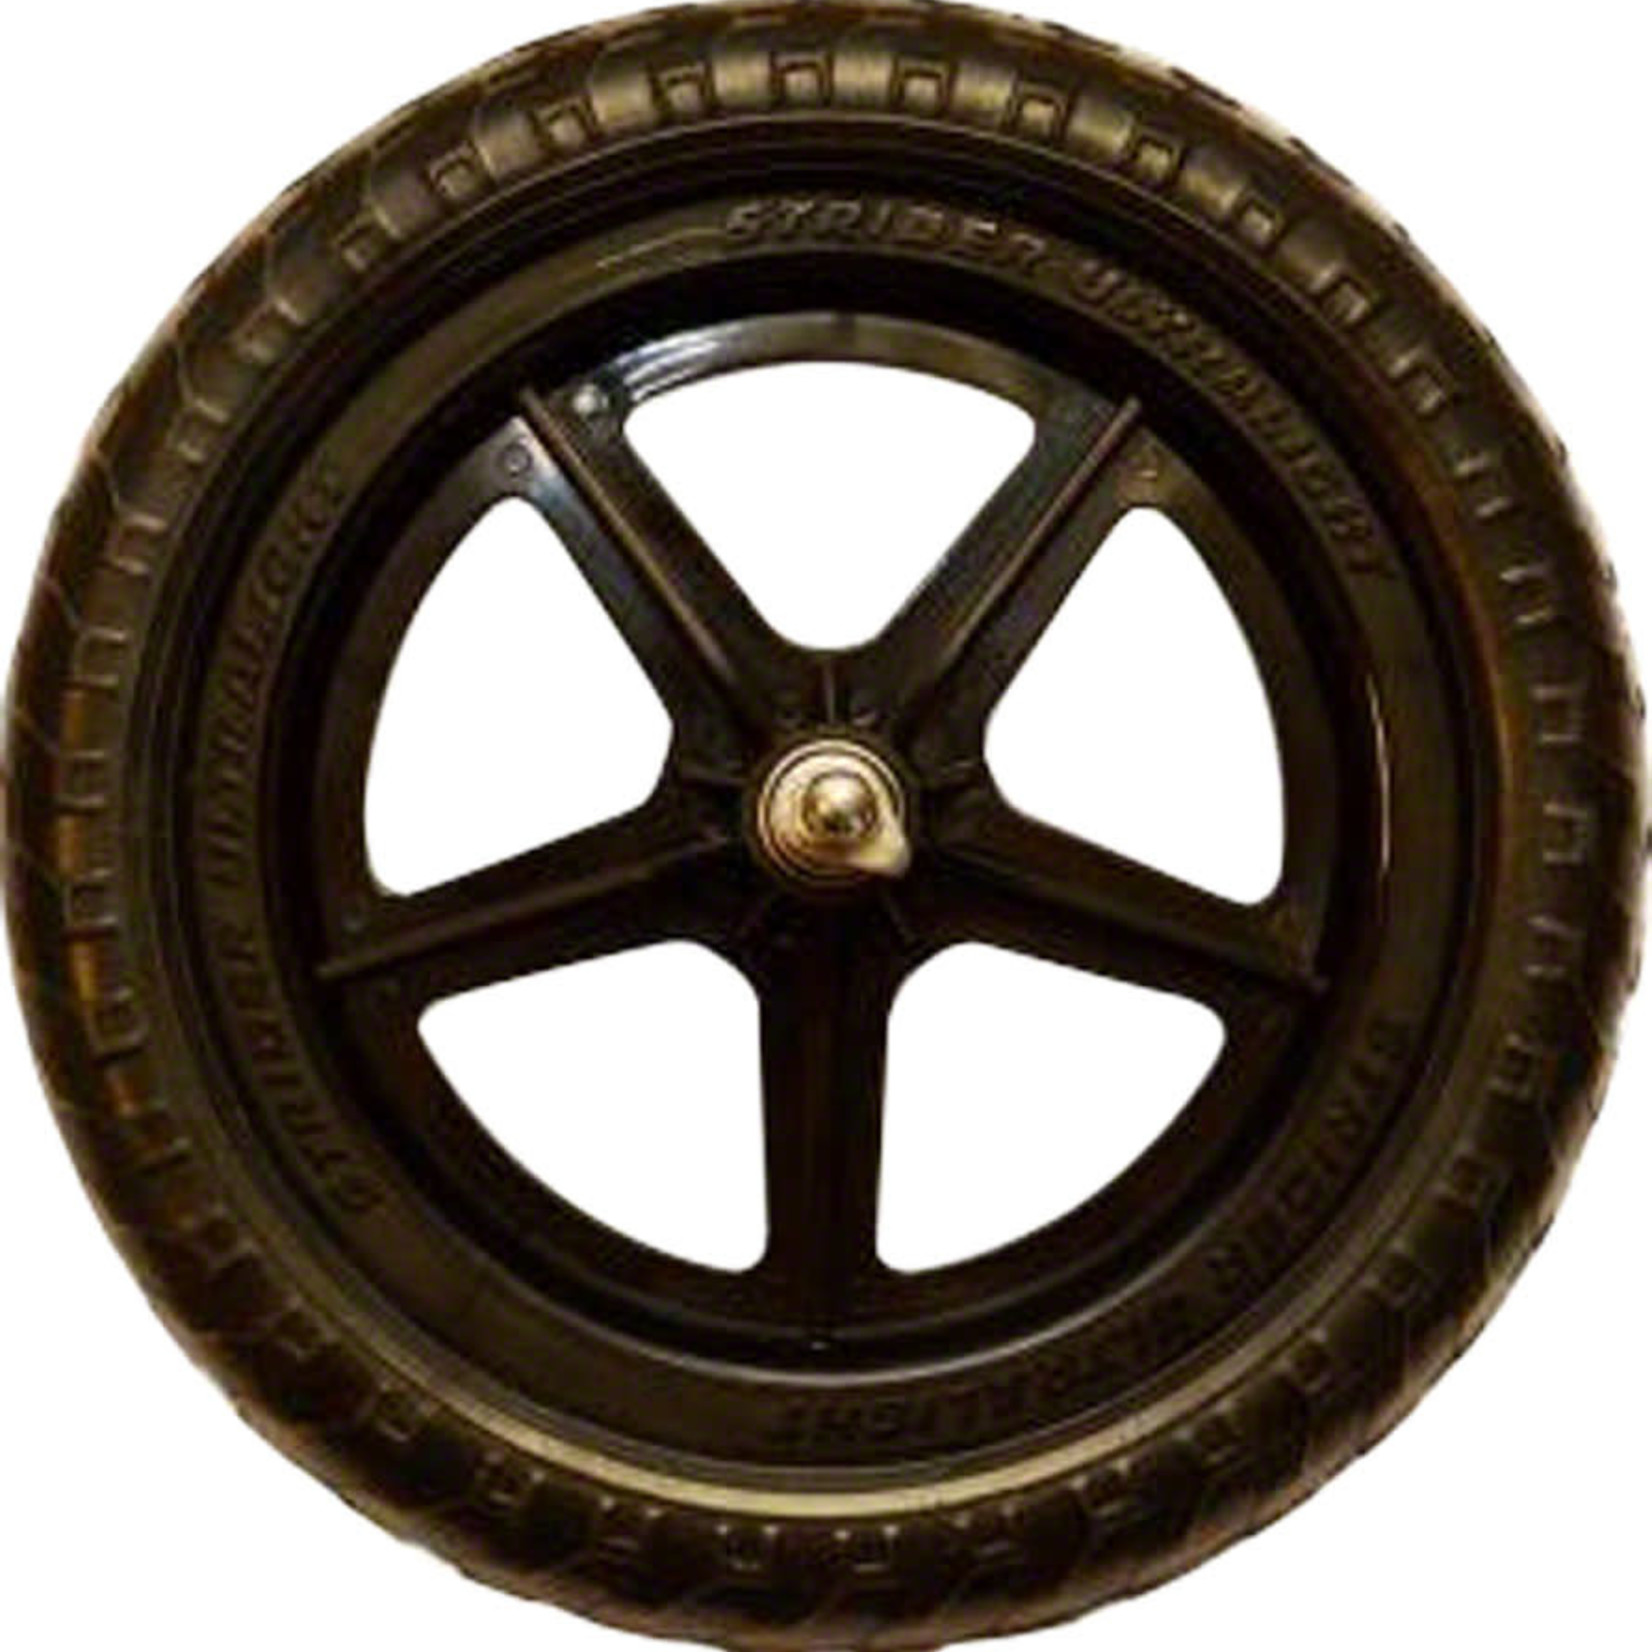 Strider Sports Strider Replacement Wheel: Ultralight, 12", Black, Sold as Each 